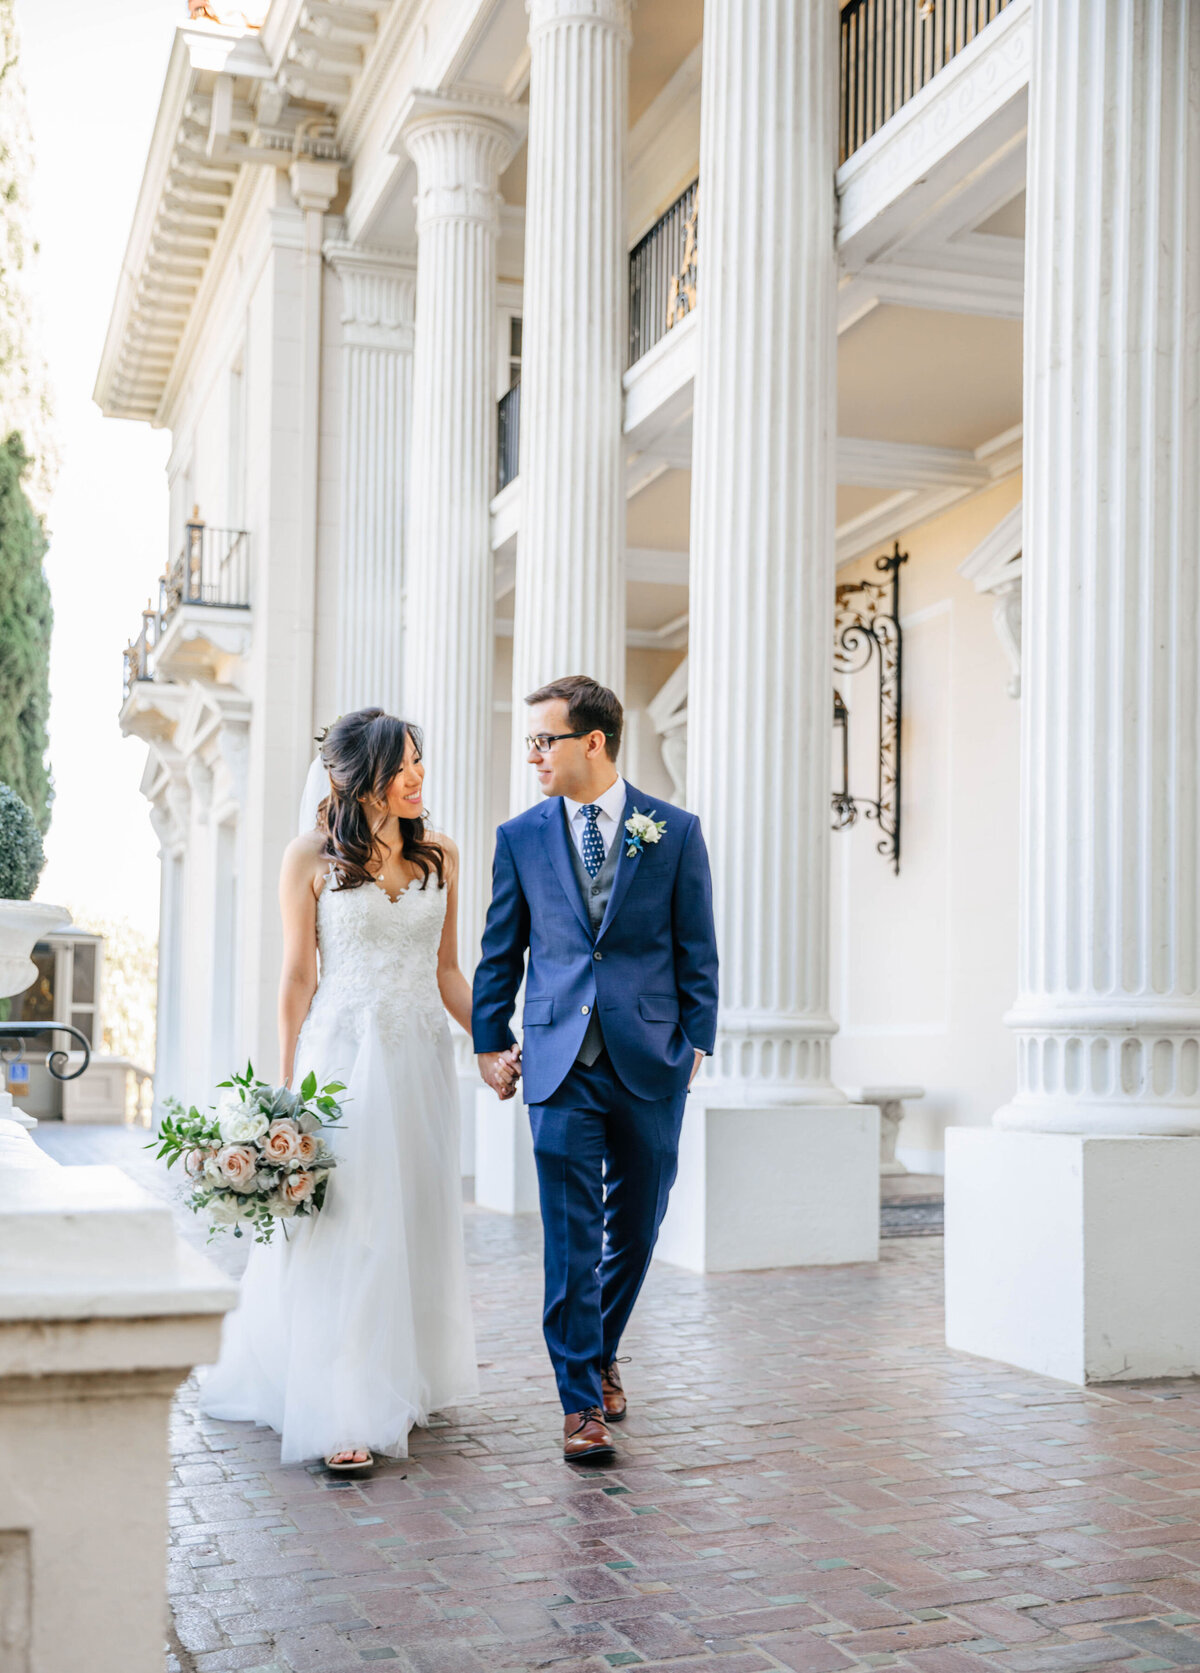 bride and groom walking in front of columns